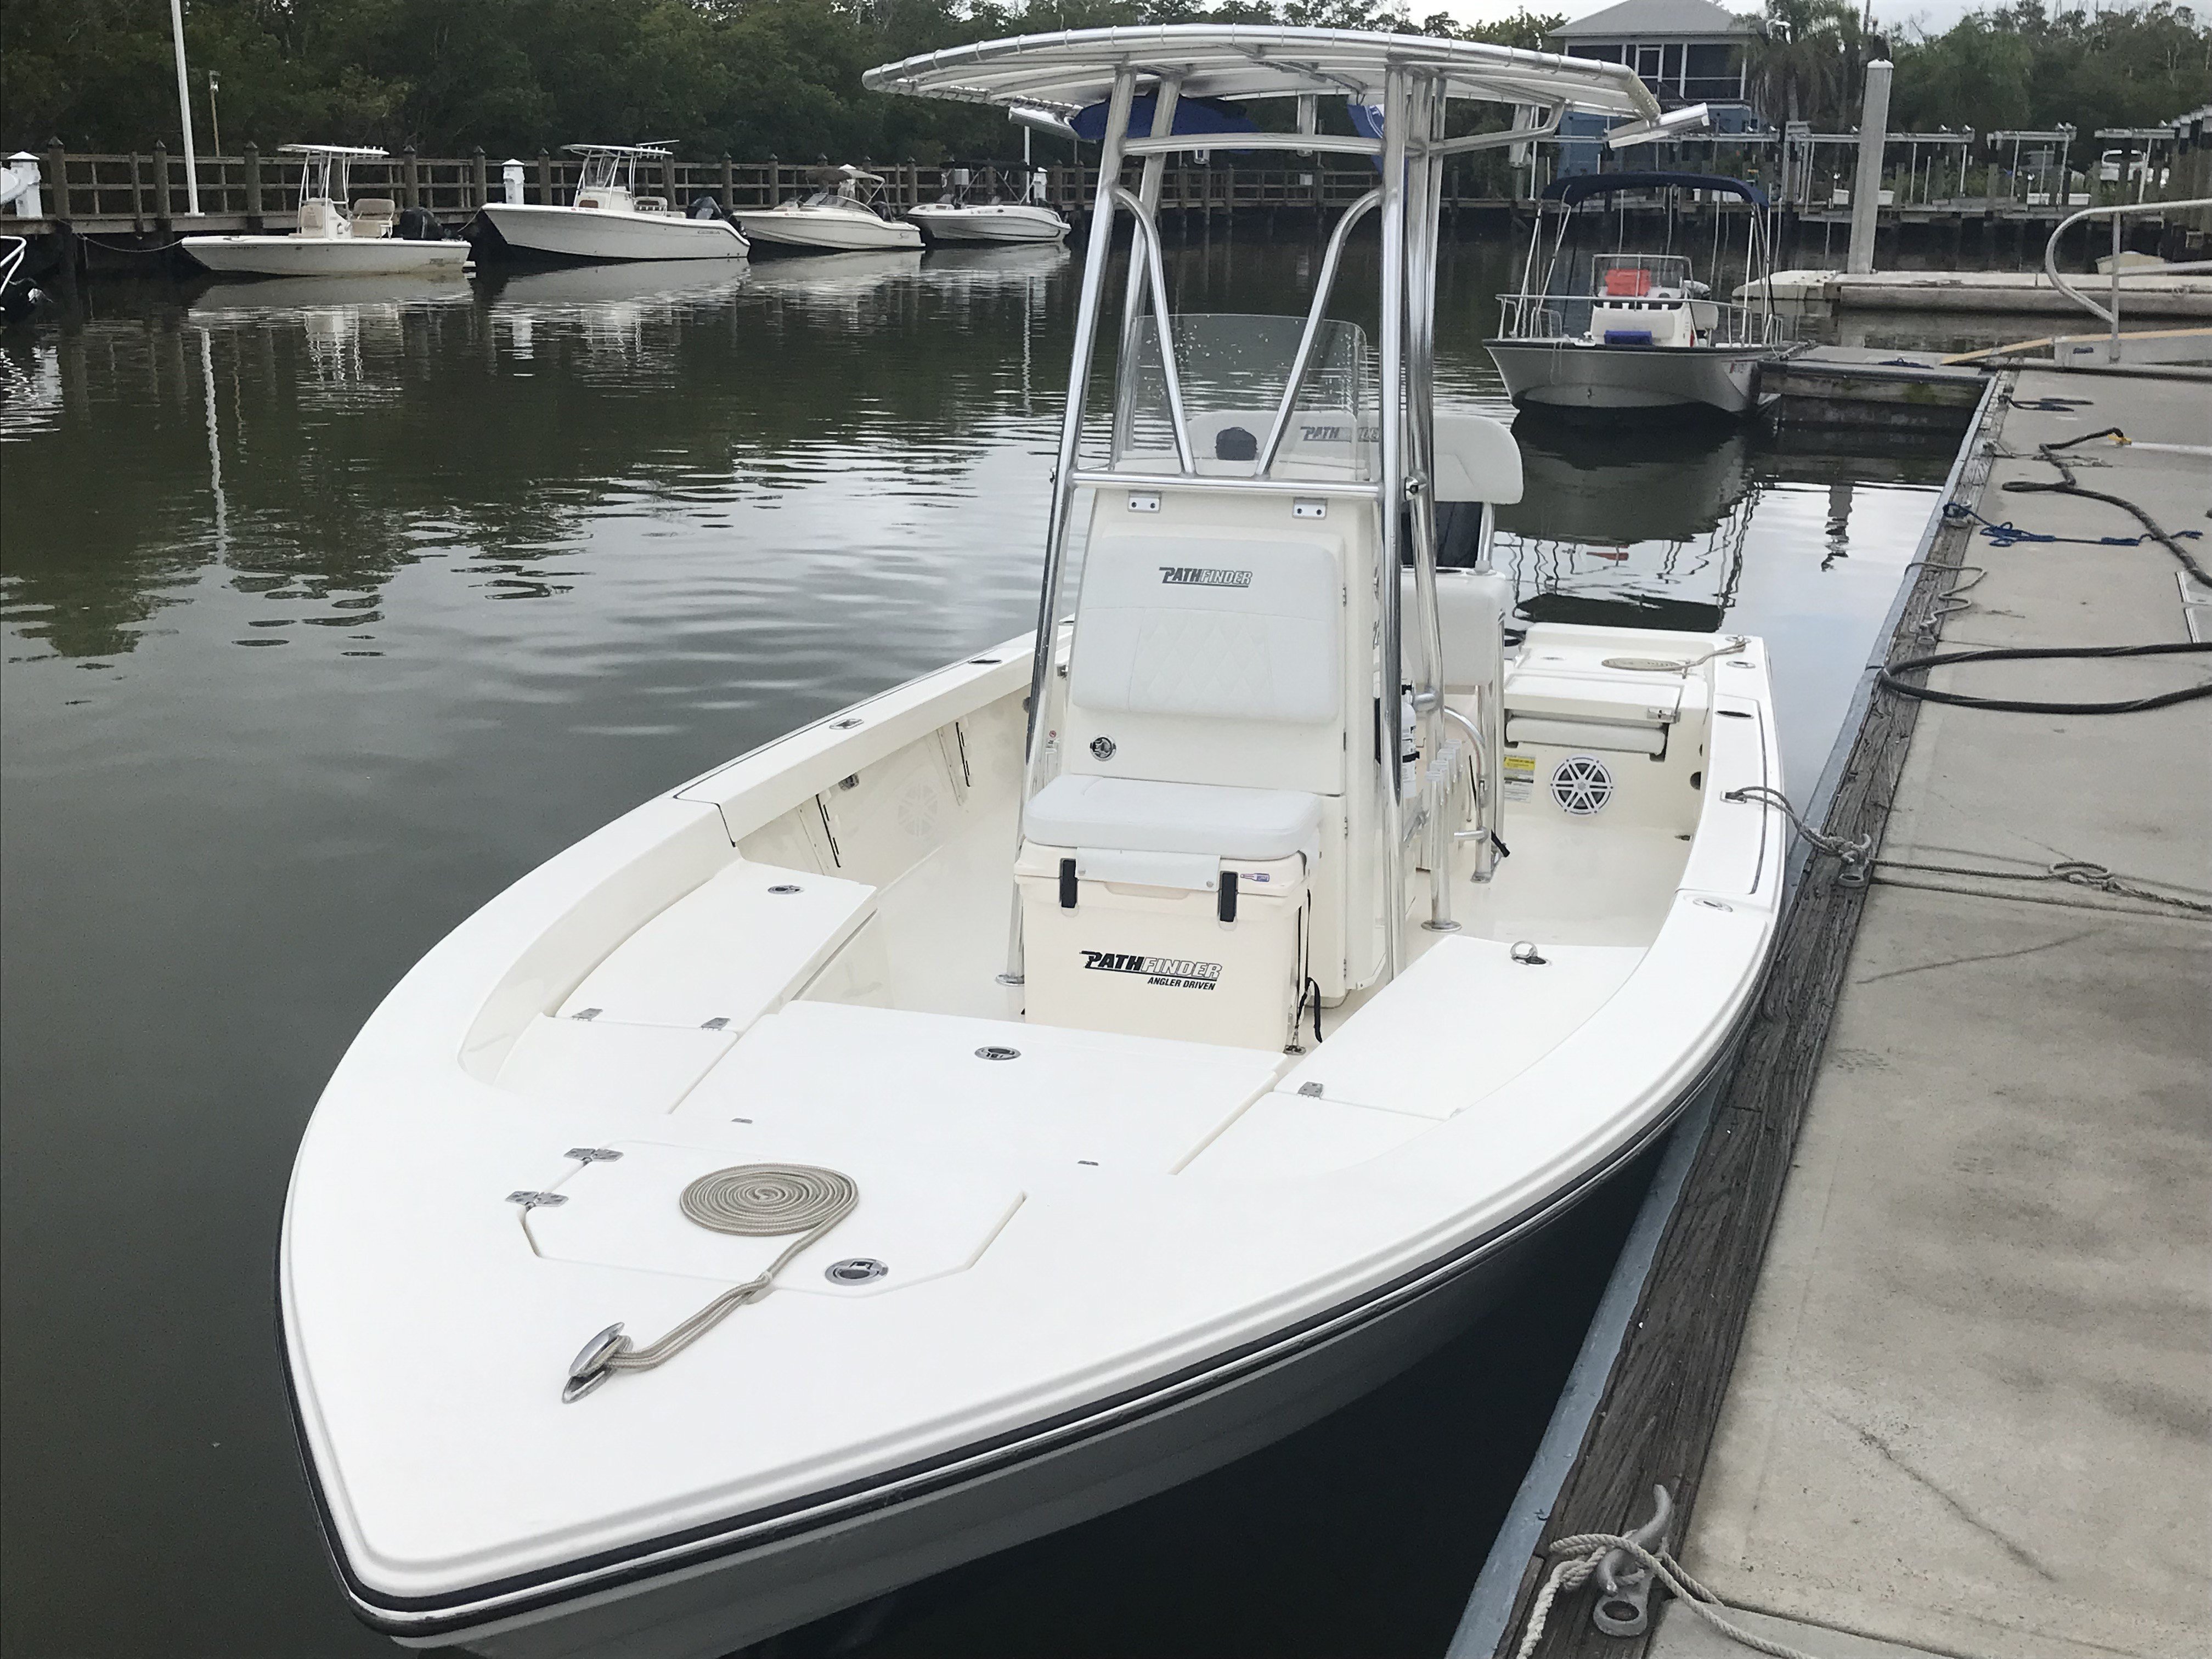 THE HIGHLANDER (22FT Center Console Pathfinder 150 HP Fishing)